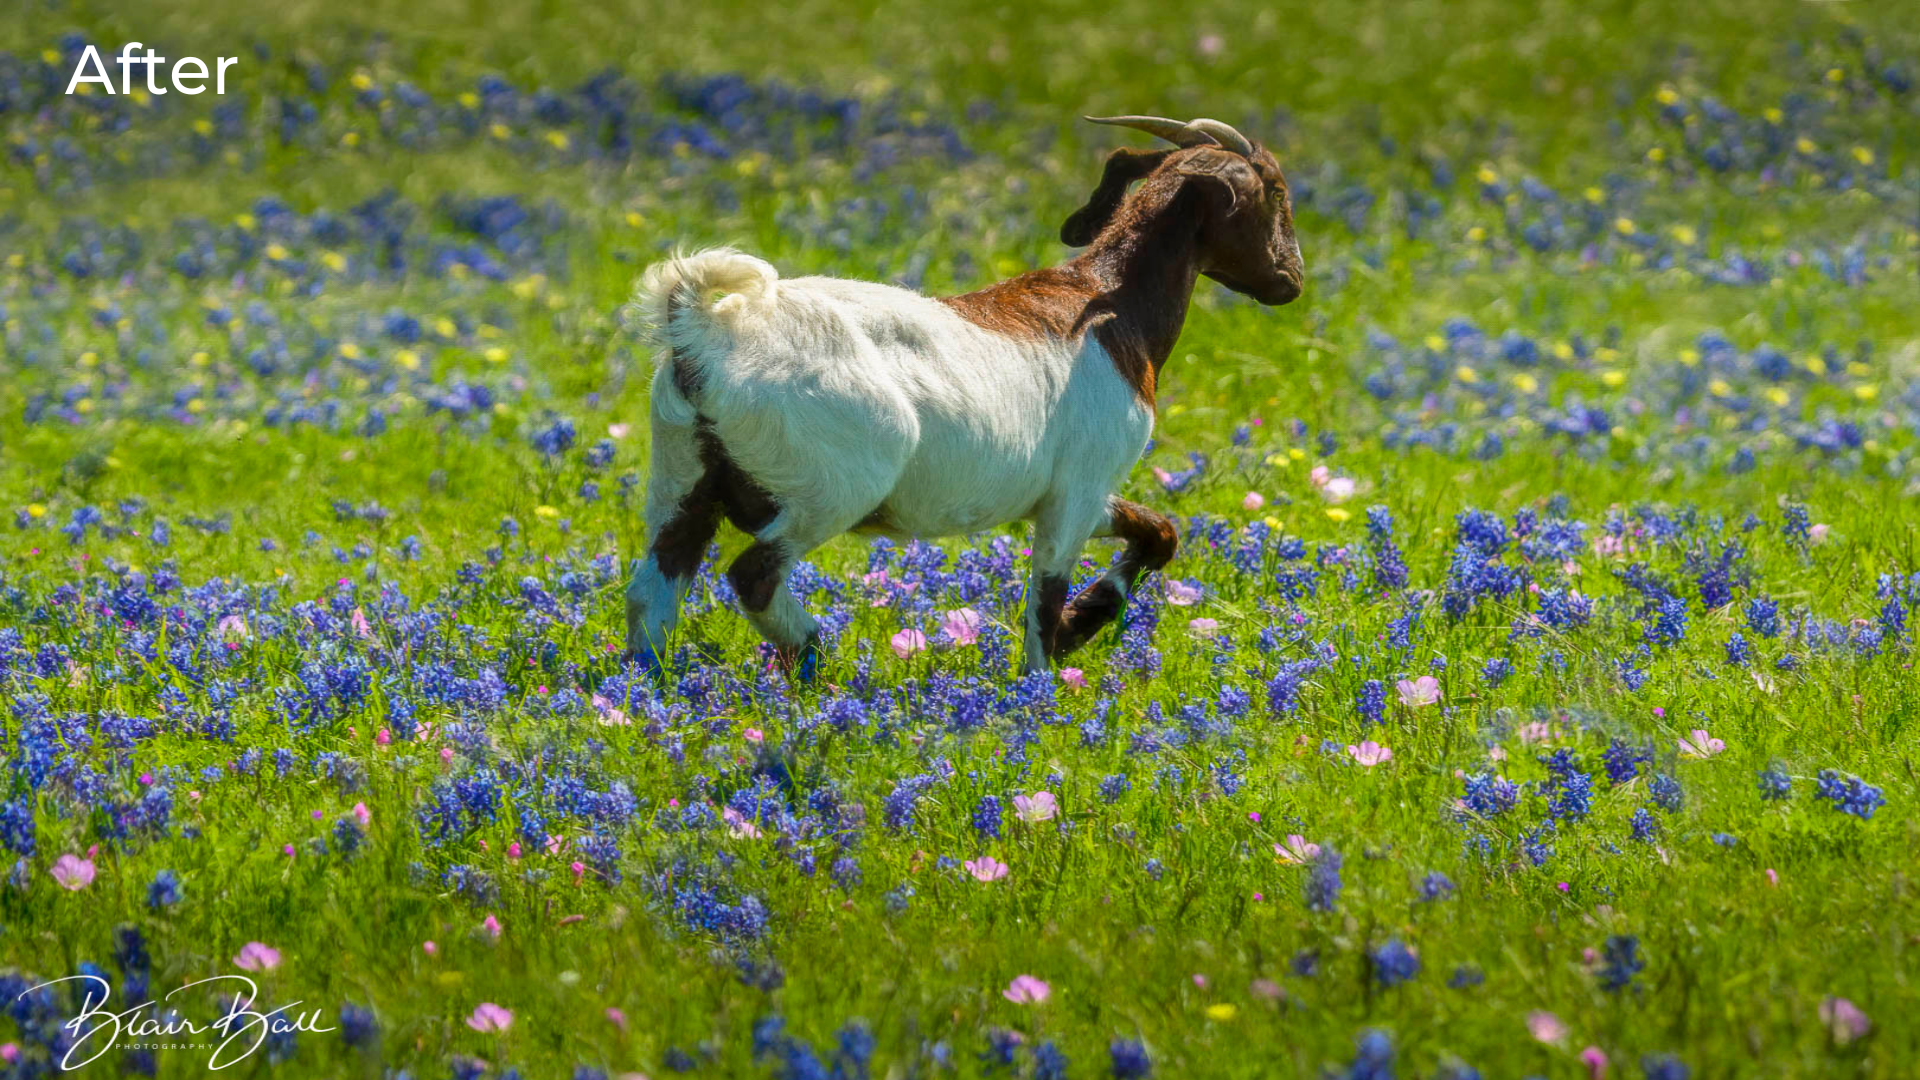 Texas Goat in Field of Bluebonnets - After - ©Blair Ball Photography Image